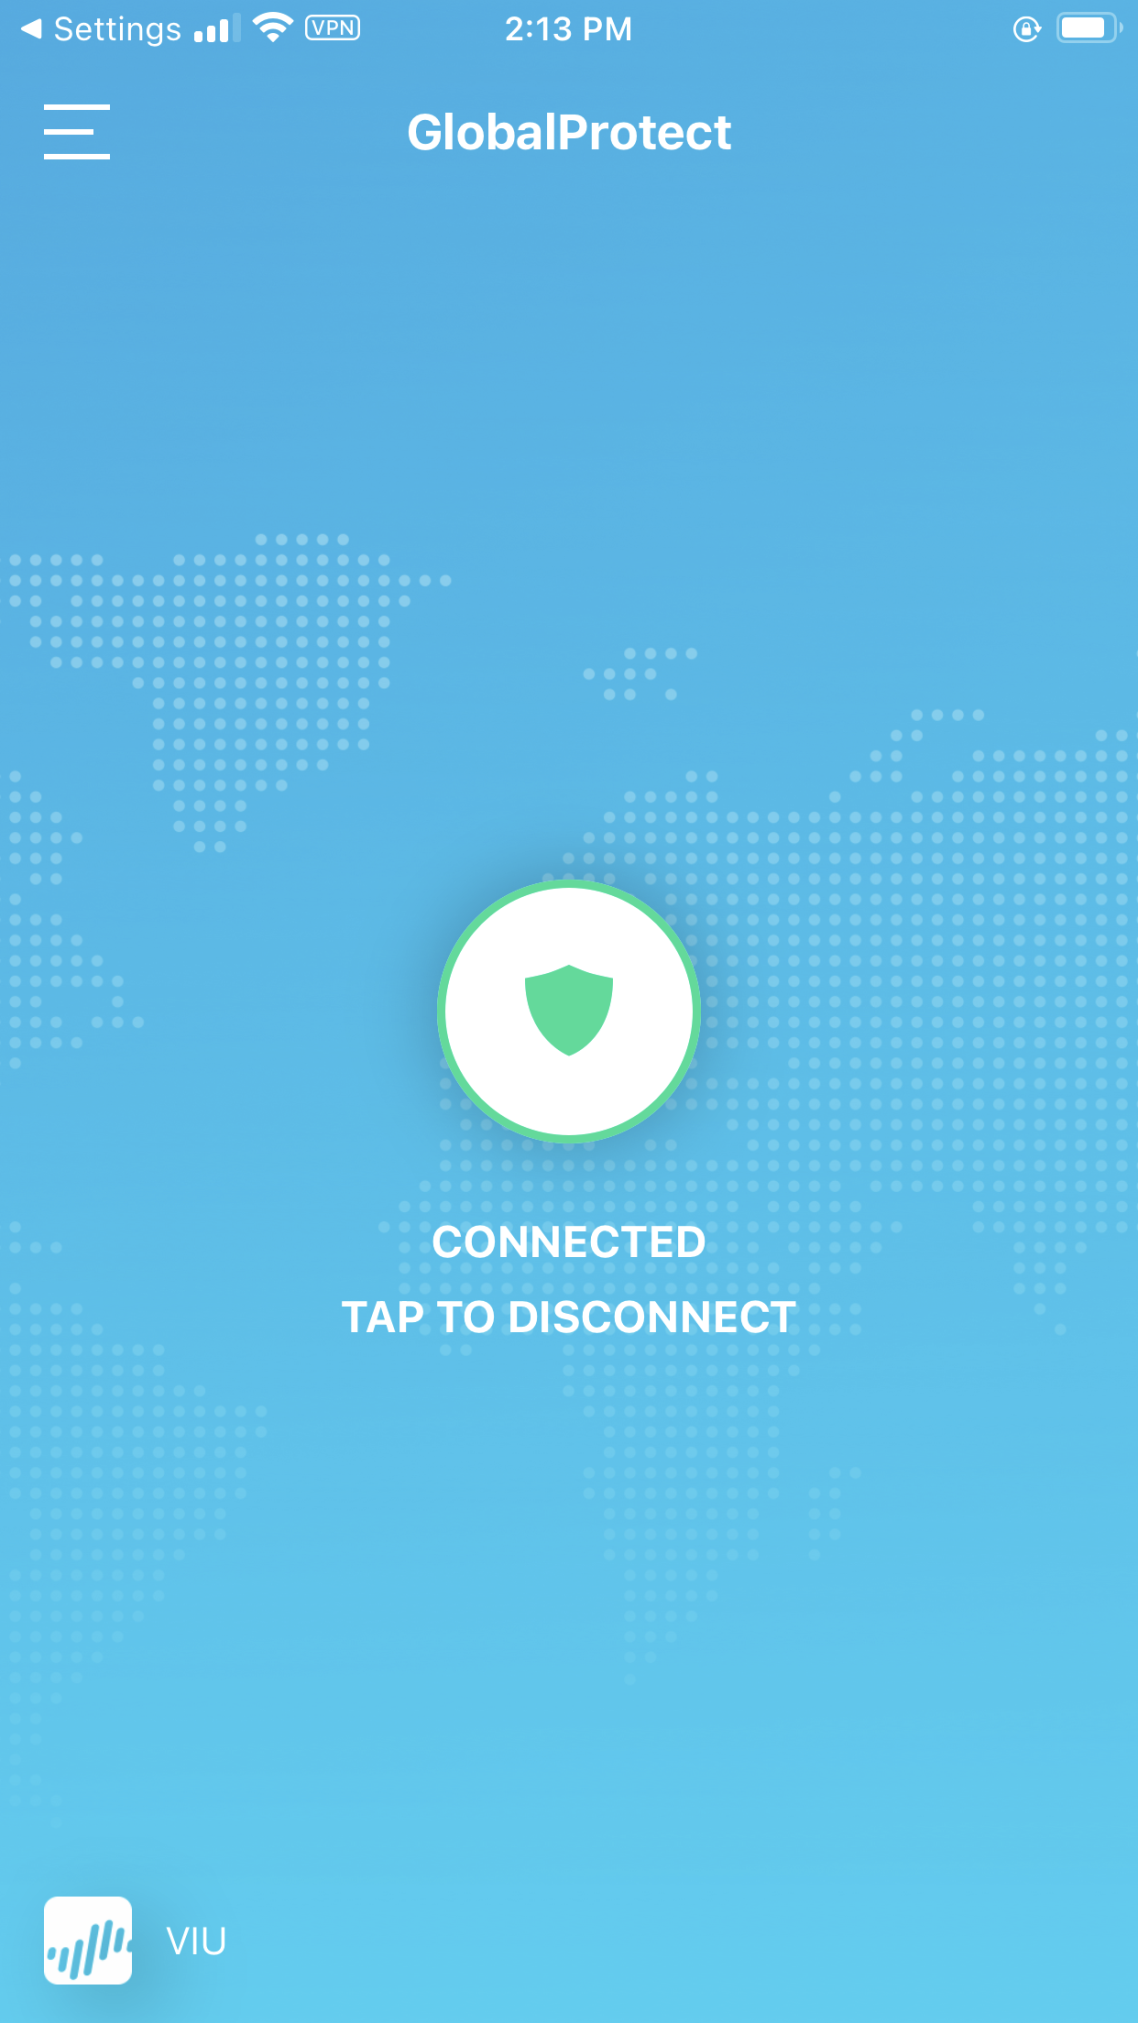 GlobalProtect iOS Connected